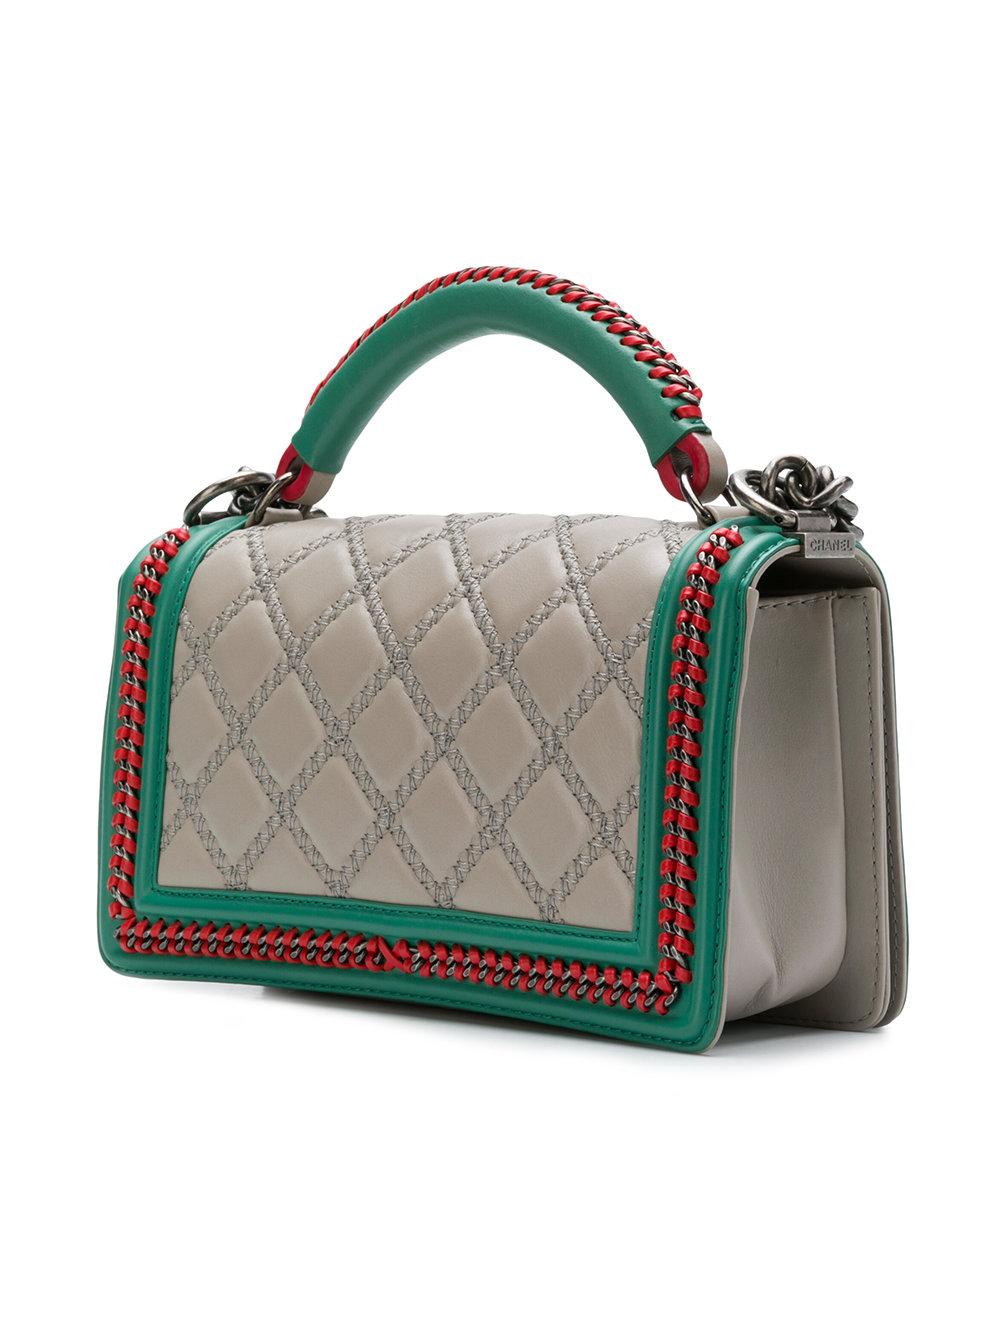 Crafted in a striking combination of beige, red and green lambskin leather, this limited edition tri colour flap Bag from the Chanel Pre-Fall 2015 collection features the iconic quilted diamond pattern, logo push lock and top handle deisgn, an